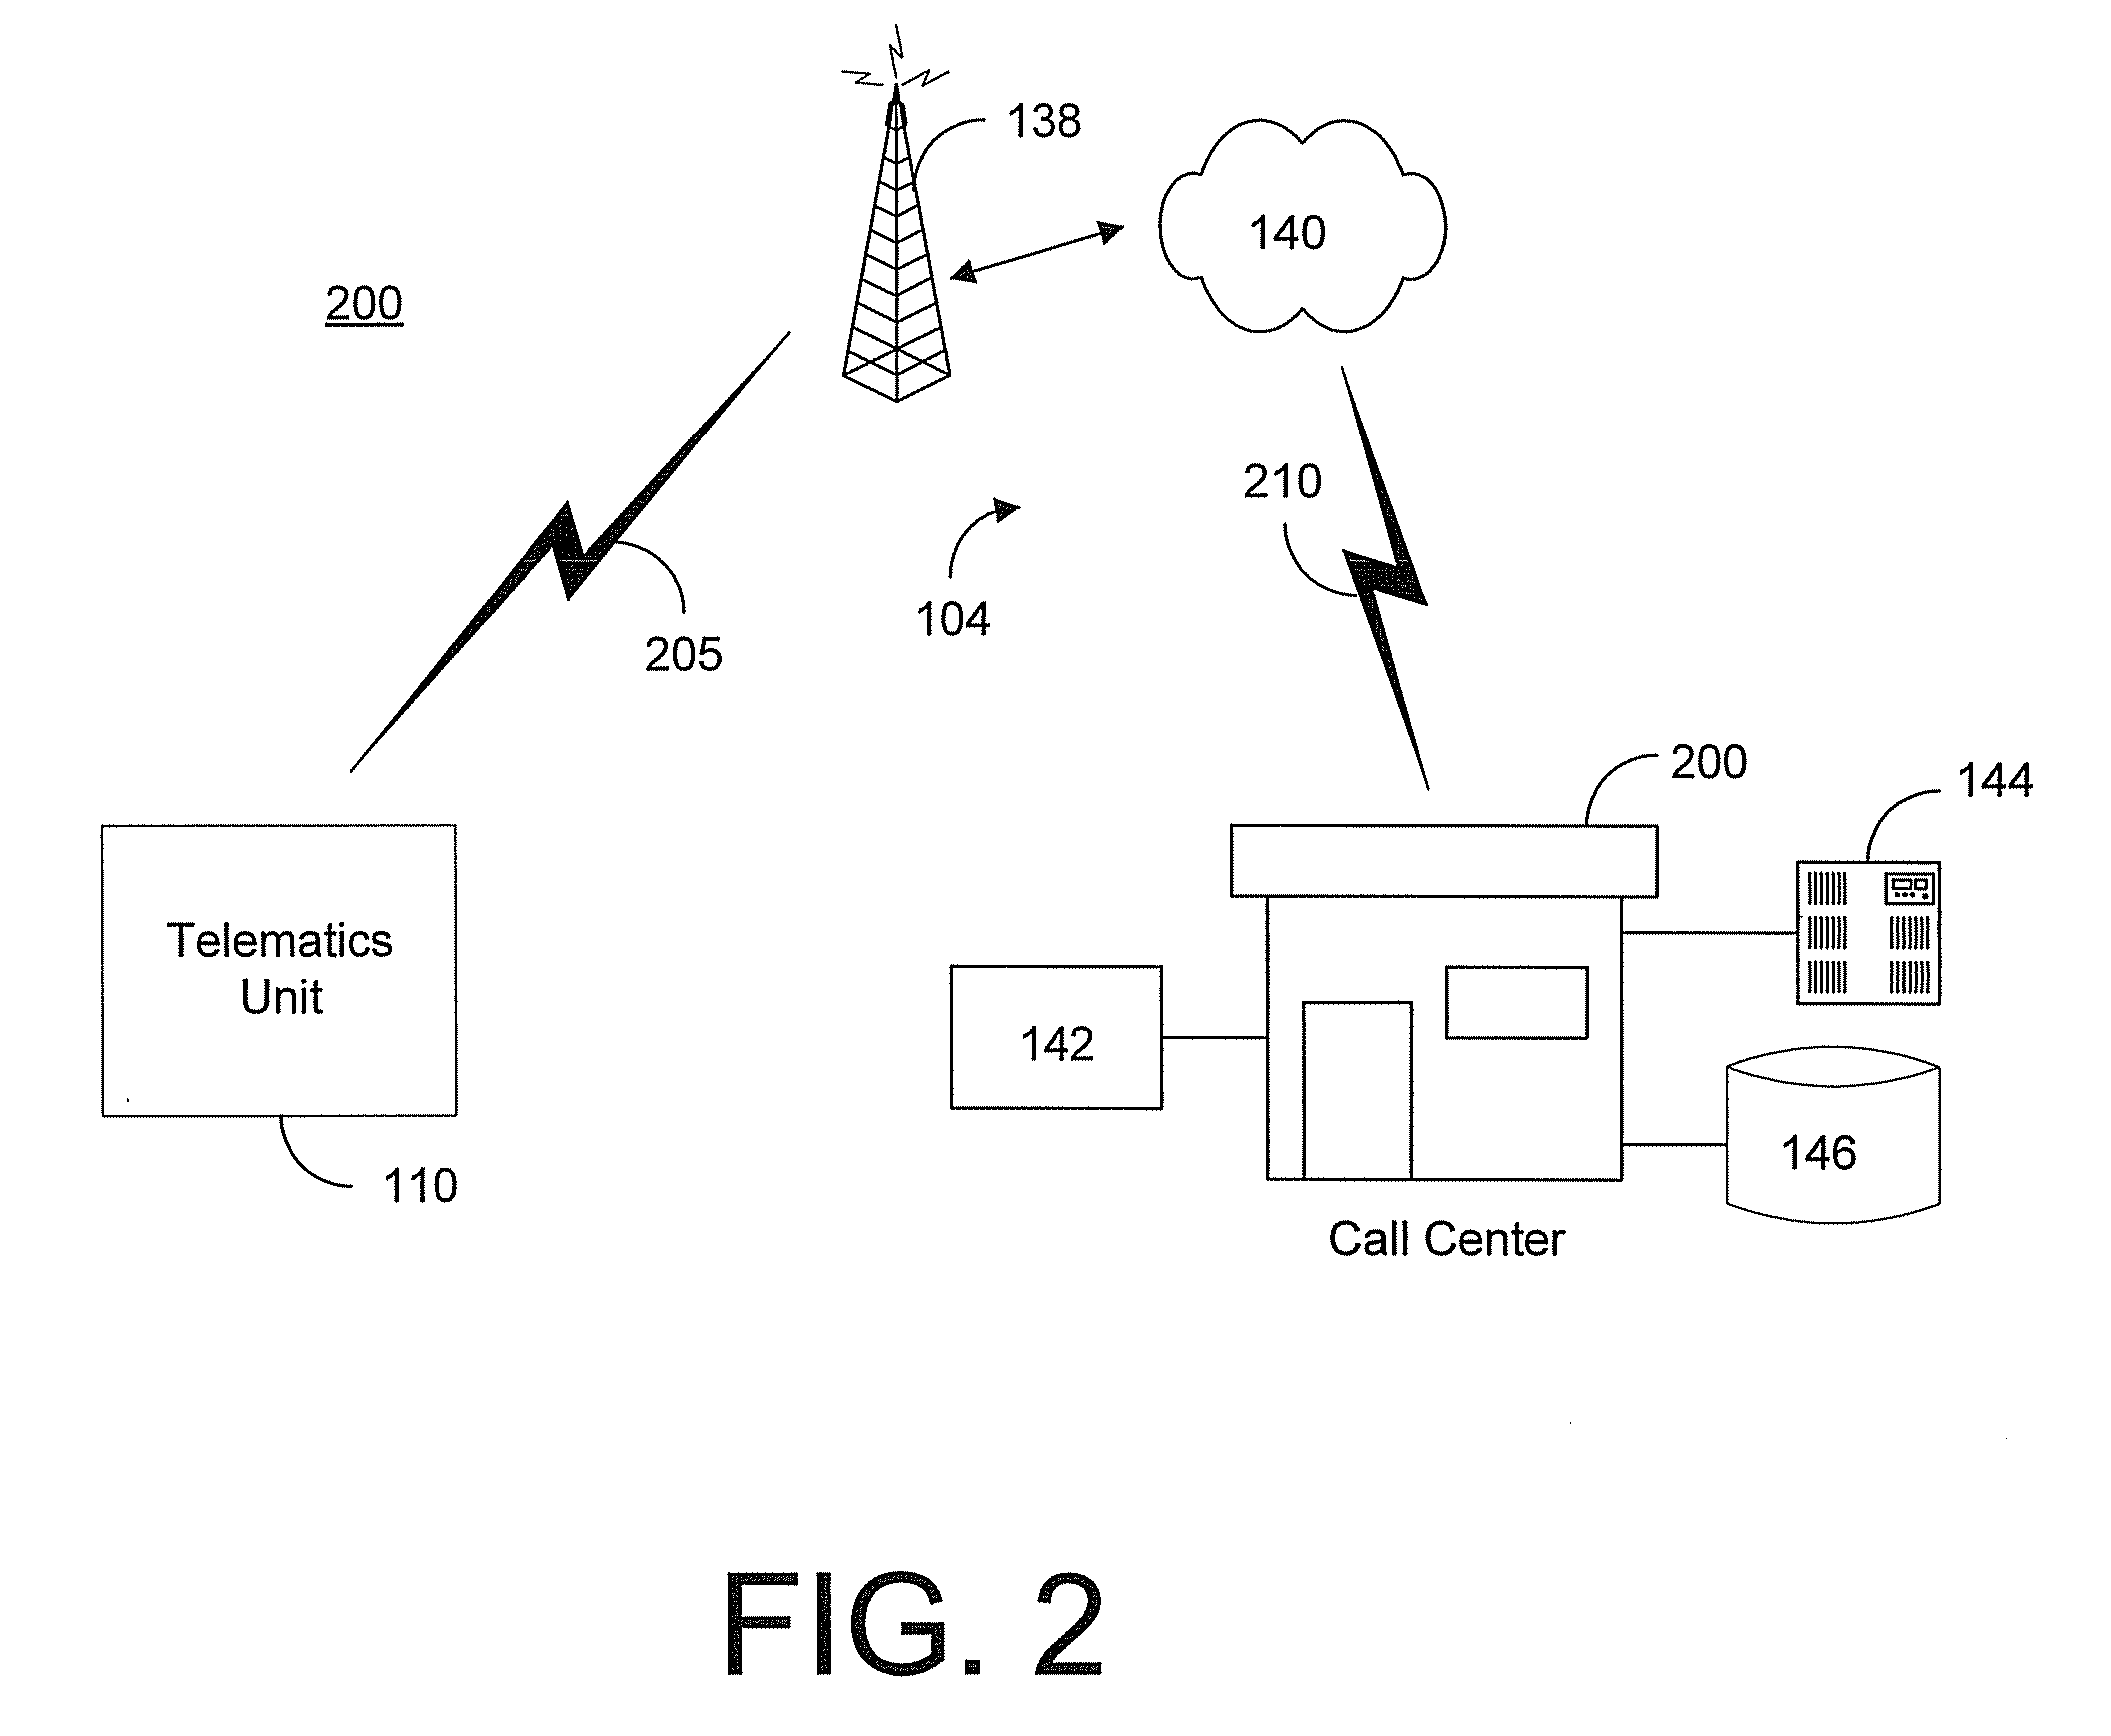 Method and System for Configuring a Telematics Device Using Two-Way Data Messaging